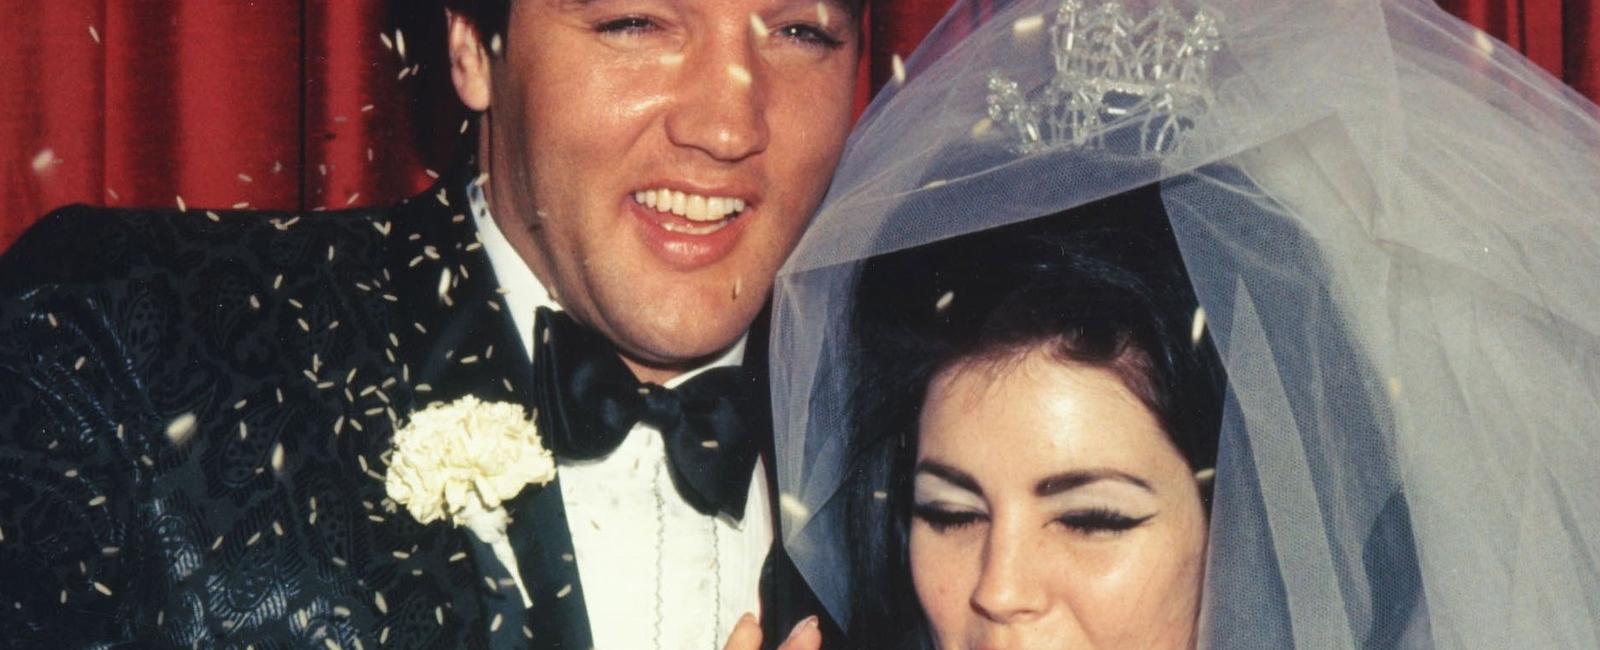 Priscilla presley was only 14 years old when she met elvis while he was 24 they married when she turned 21 in hindsight their relationship and age difference should have never happened